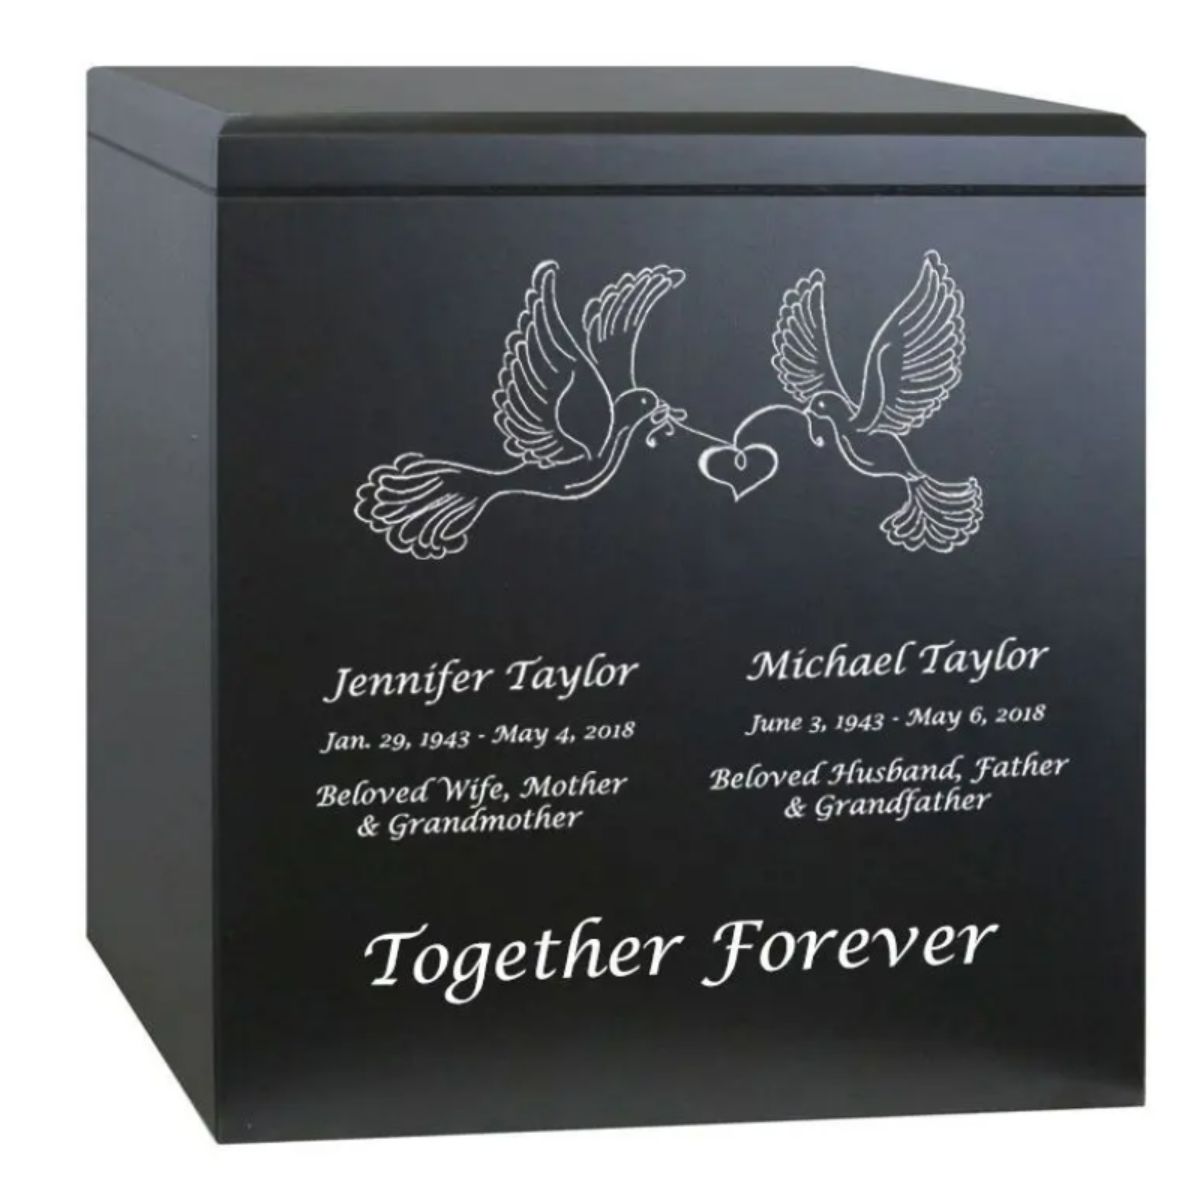 The Love Doves Companion Wood Urn is a beautifully handmade urn of alder wood 